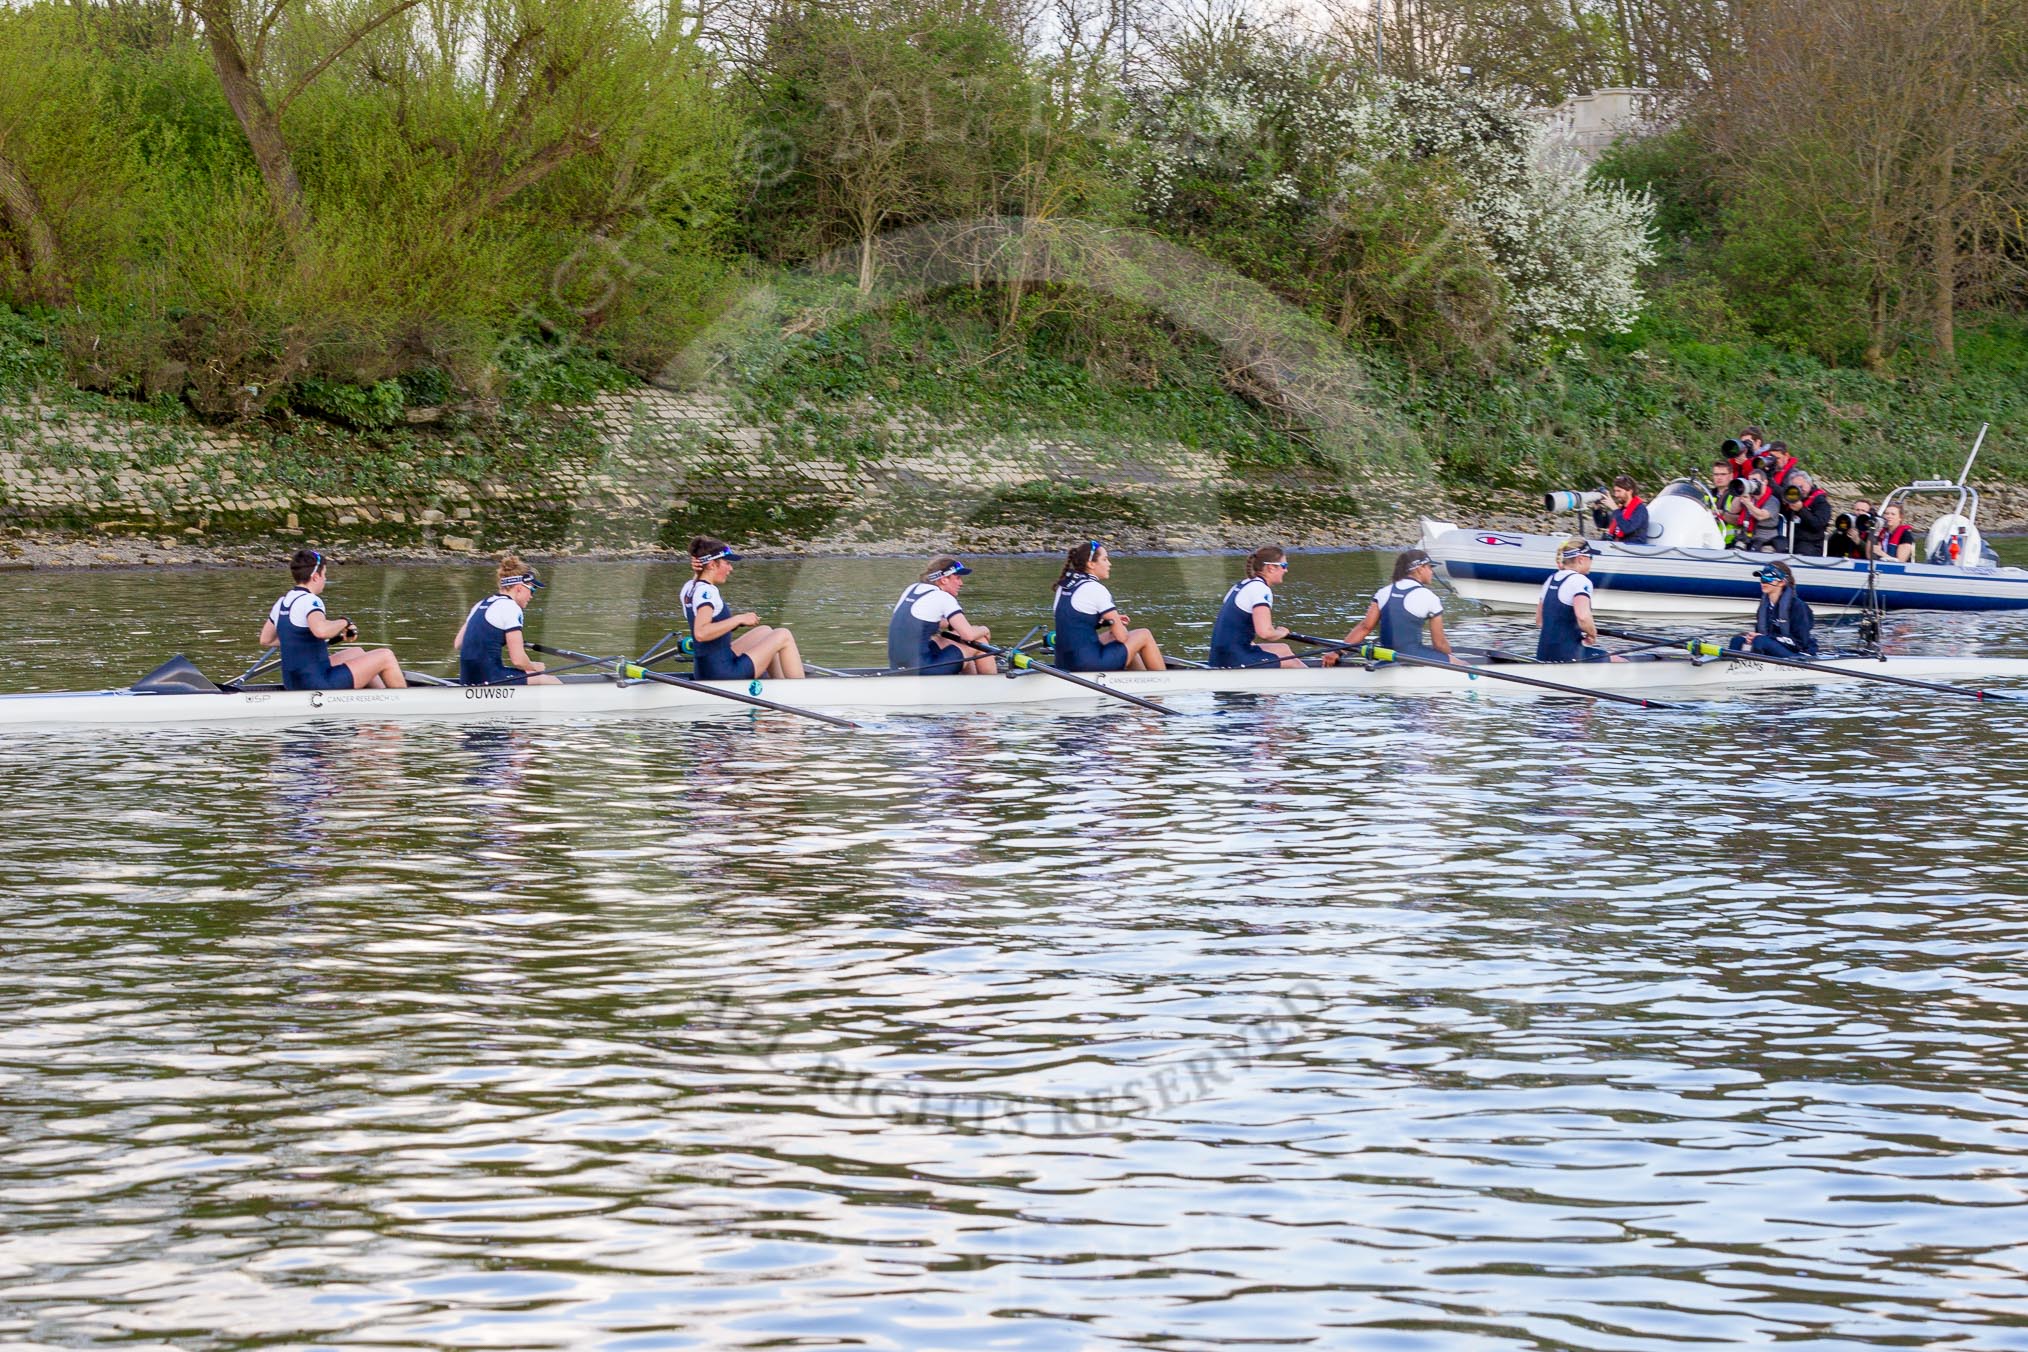 The Boat Race season 2017 -  The Cancer Research Women's Boat Race: OUWBC at the finish line, with one of the press boats behind.
River Thames between Putney Bridge and Mortlake,
London SW15,

United Kingdom,
on 02 April 2017 at 16:57, image #193